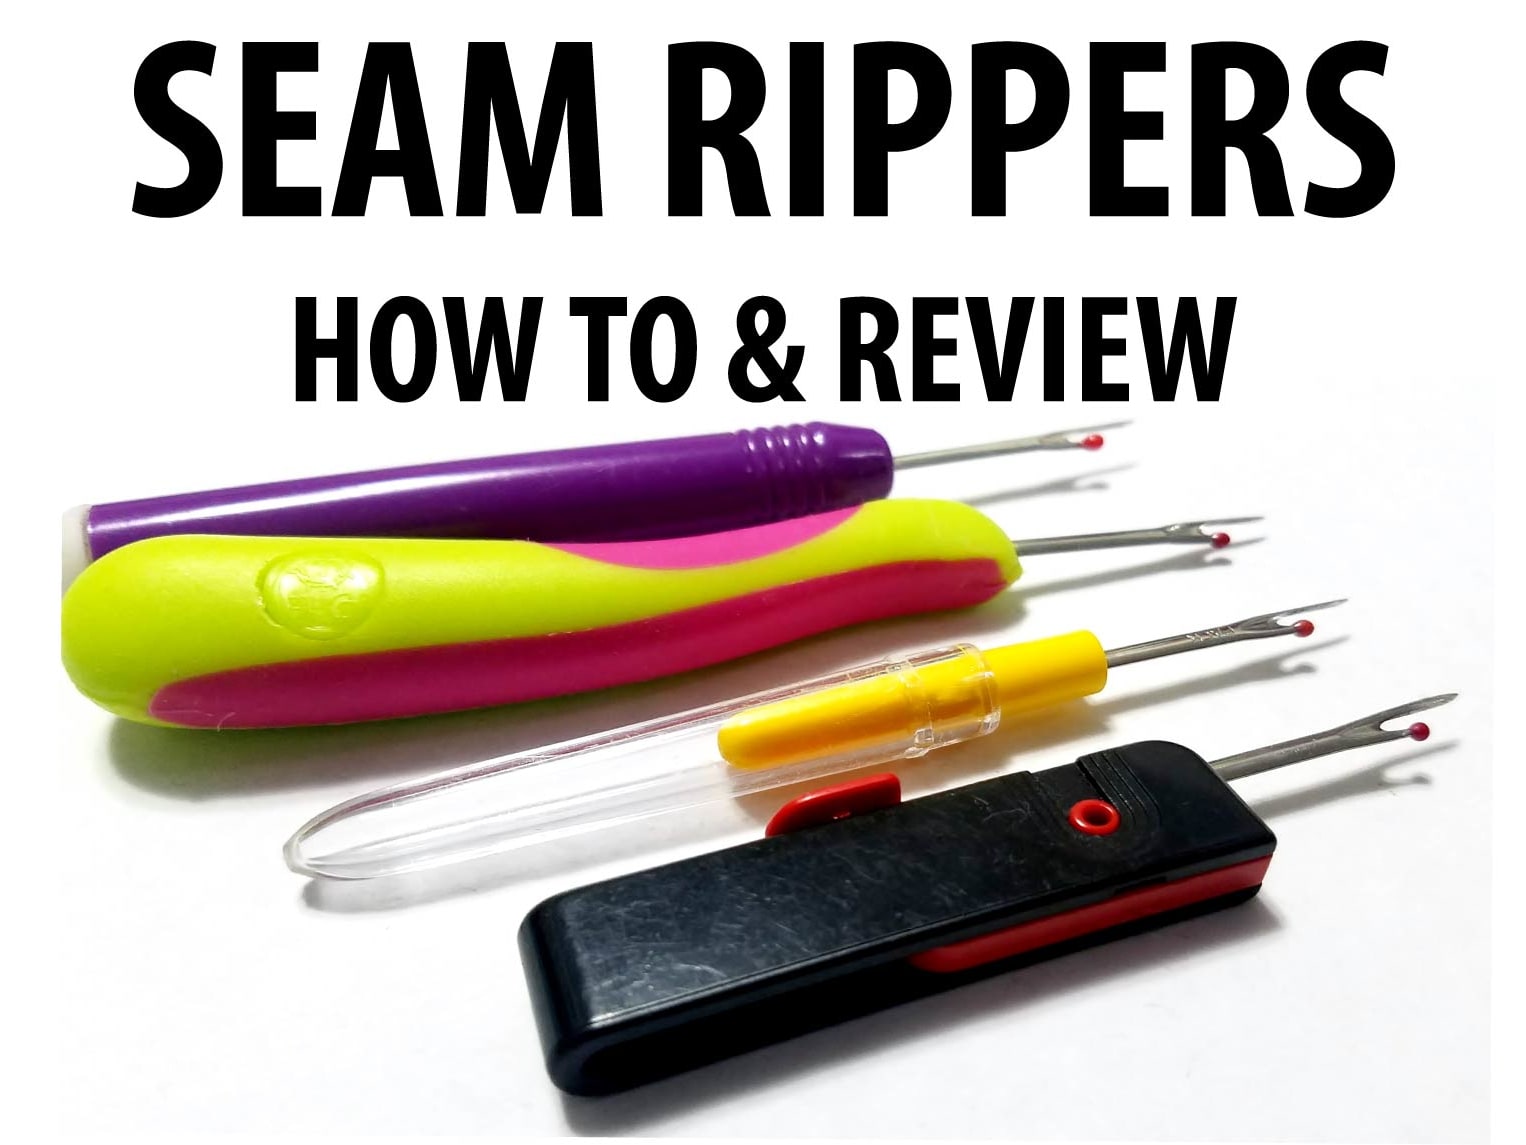 8 of the best seam rippers on the market! - Gathered